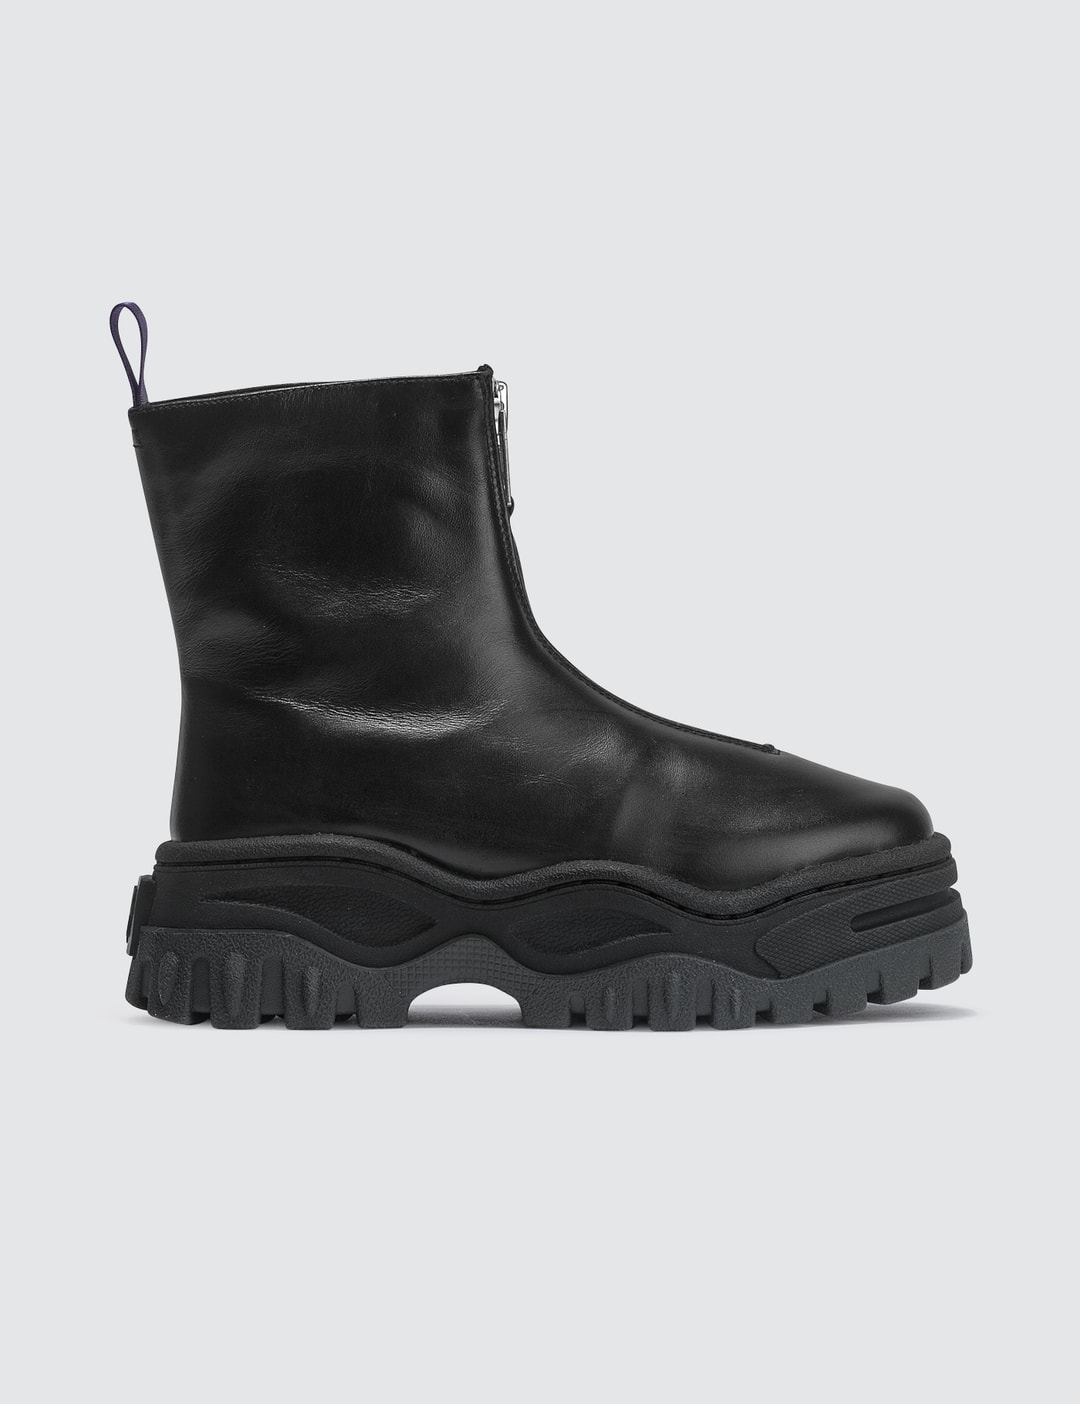 Eytys - Raven Boot | HBX - Globally Curated Fashion and Lifestyle by ...